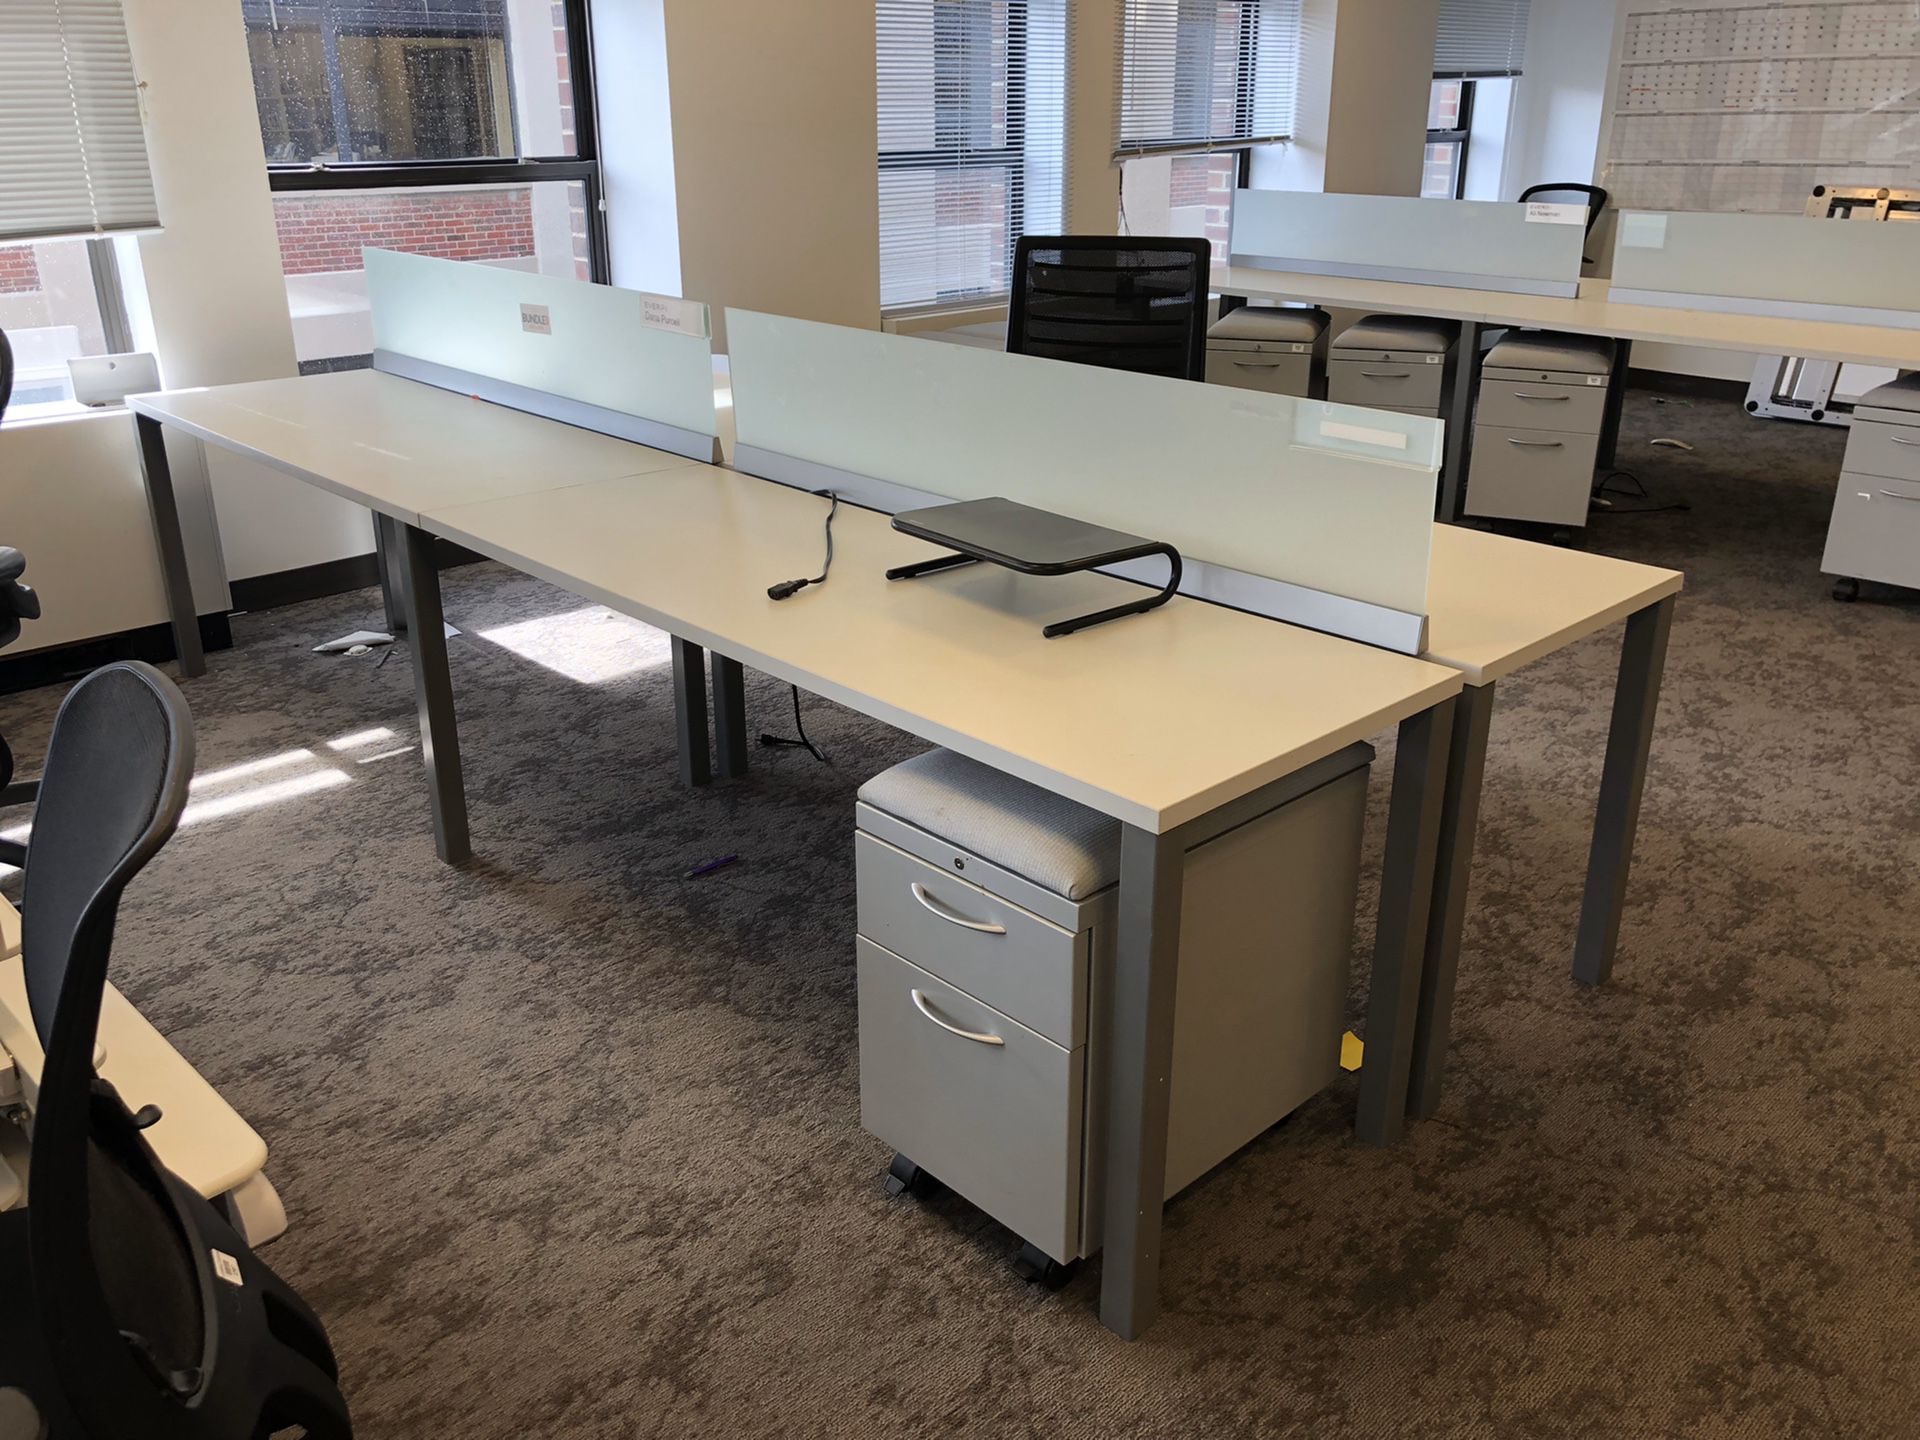 Office Furniture - Desks, Benching, Chairs, Rolling Cabinets, Allsteel, Herman Miller, Steelcase, Kimball